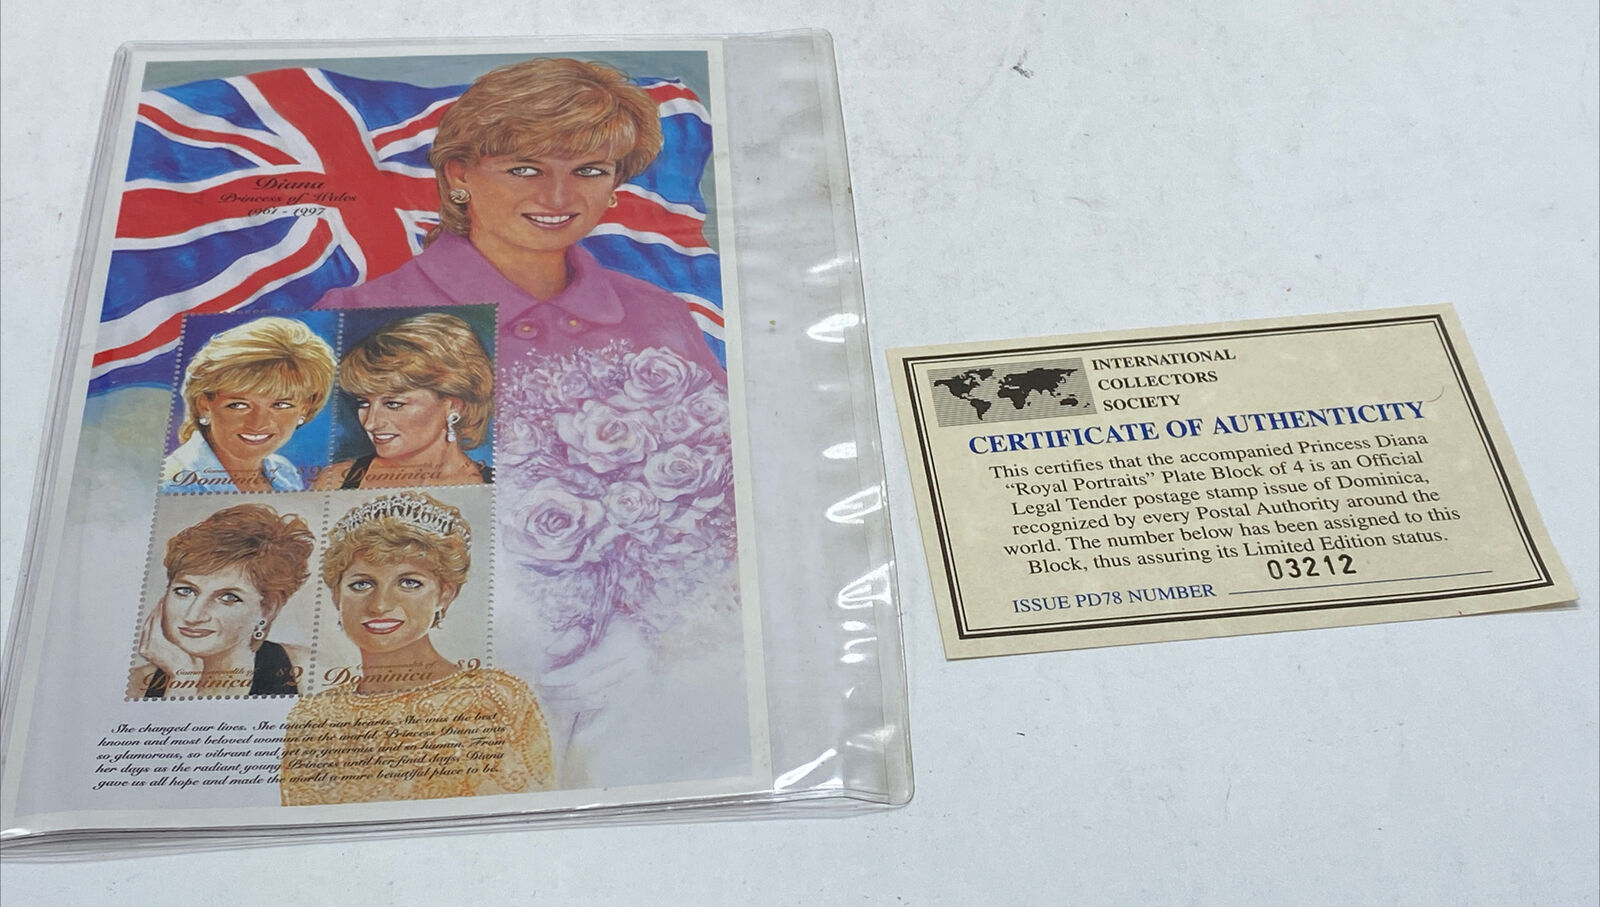 Princess Diana Royal Portraits Plate Block Of 4 Stamps Authenticity Certificate Без бренда - фотография #7